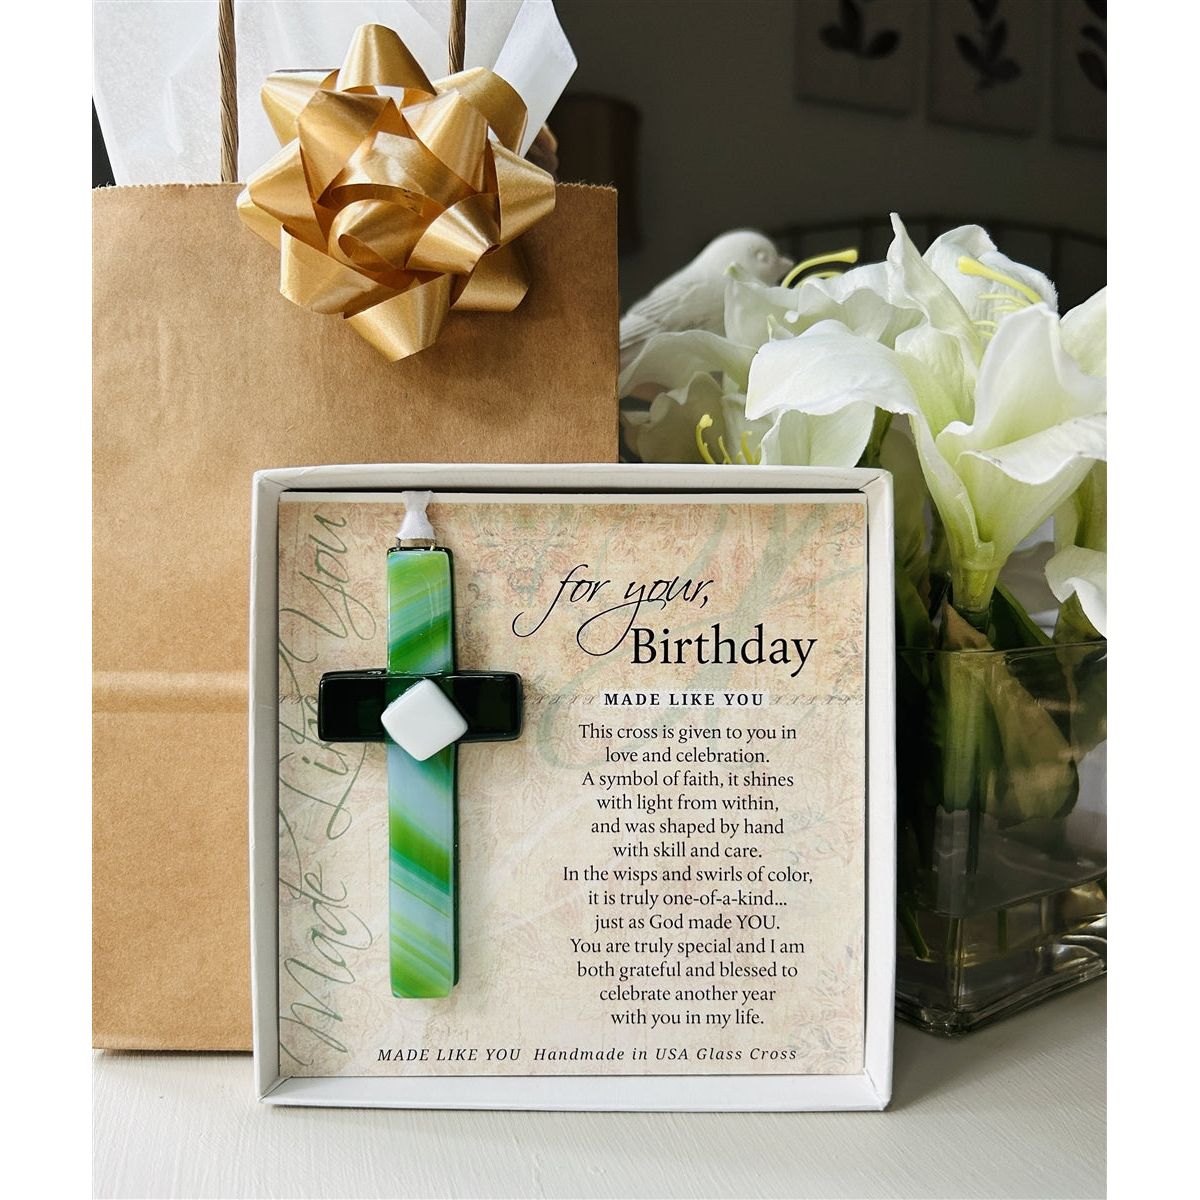 Birthday cross and sentiment in box in front of a gift bag.